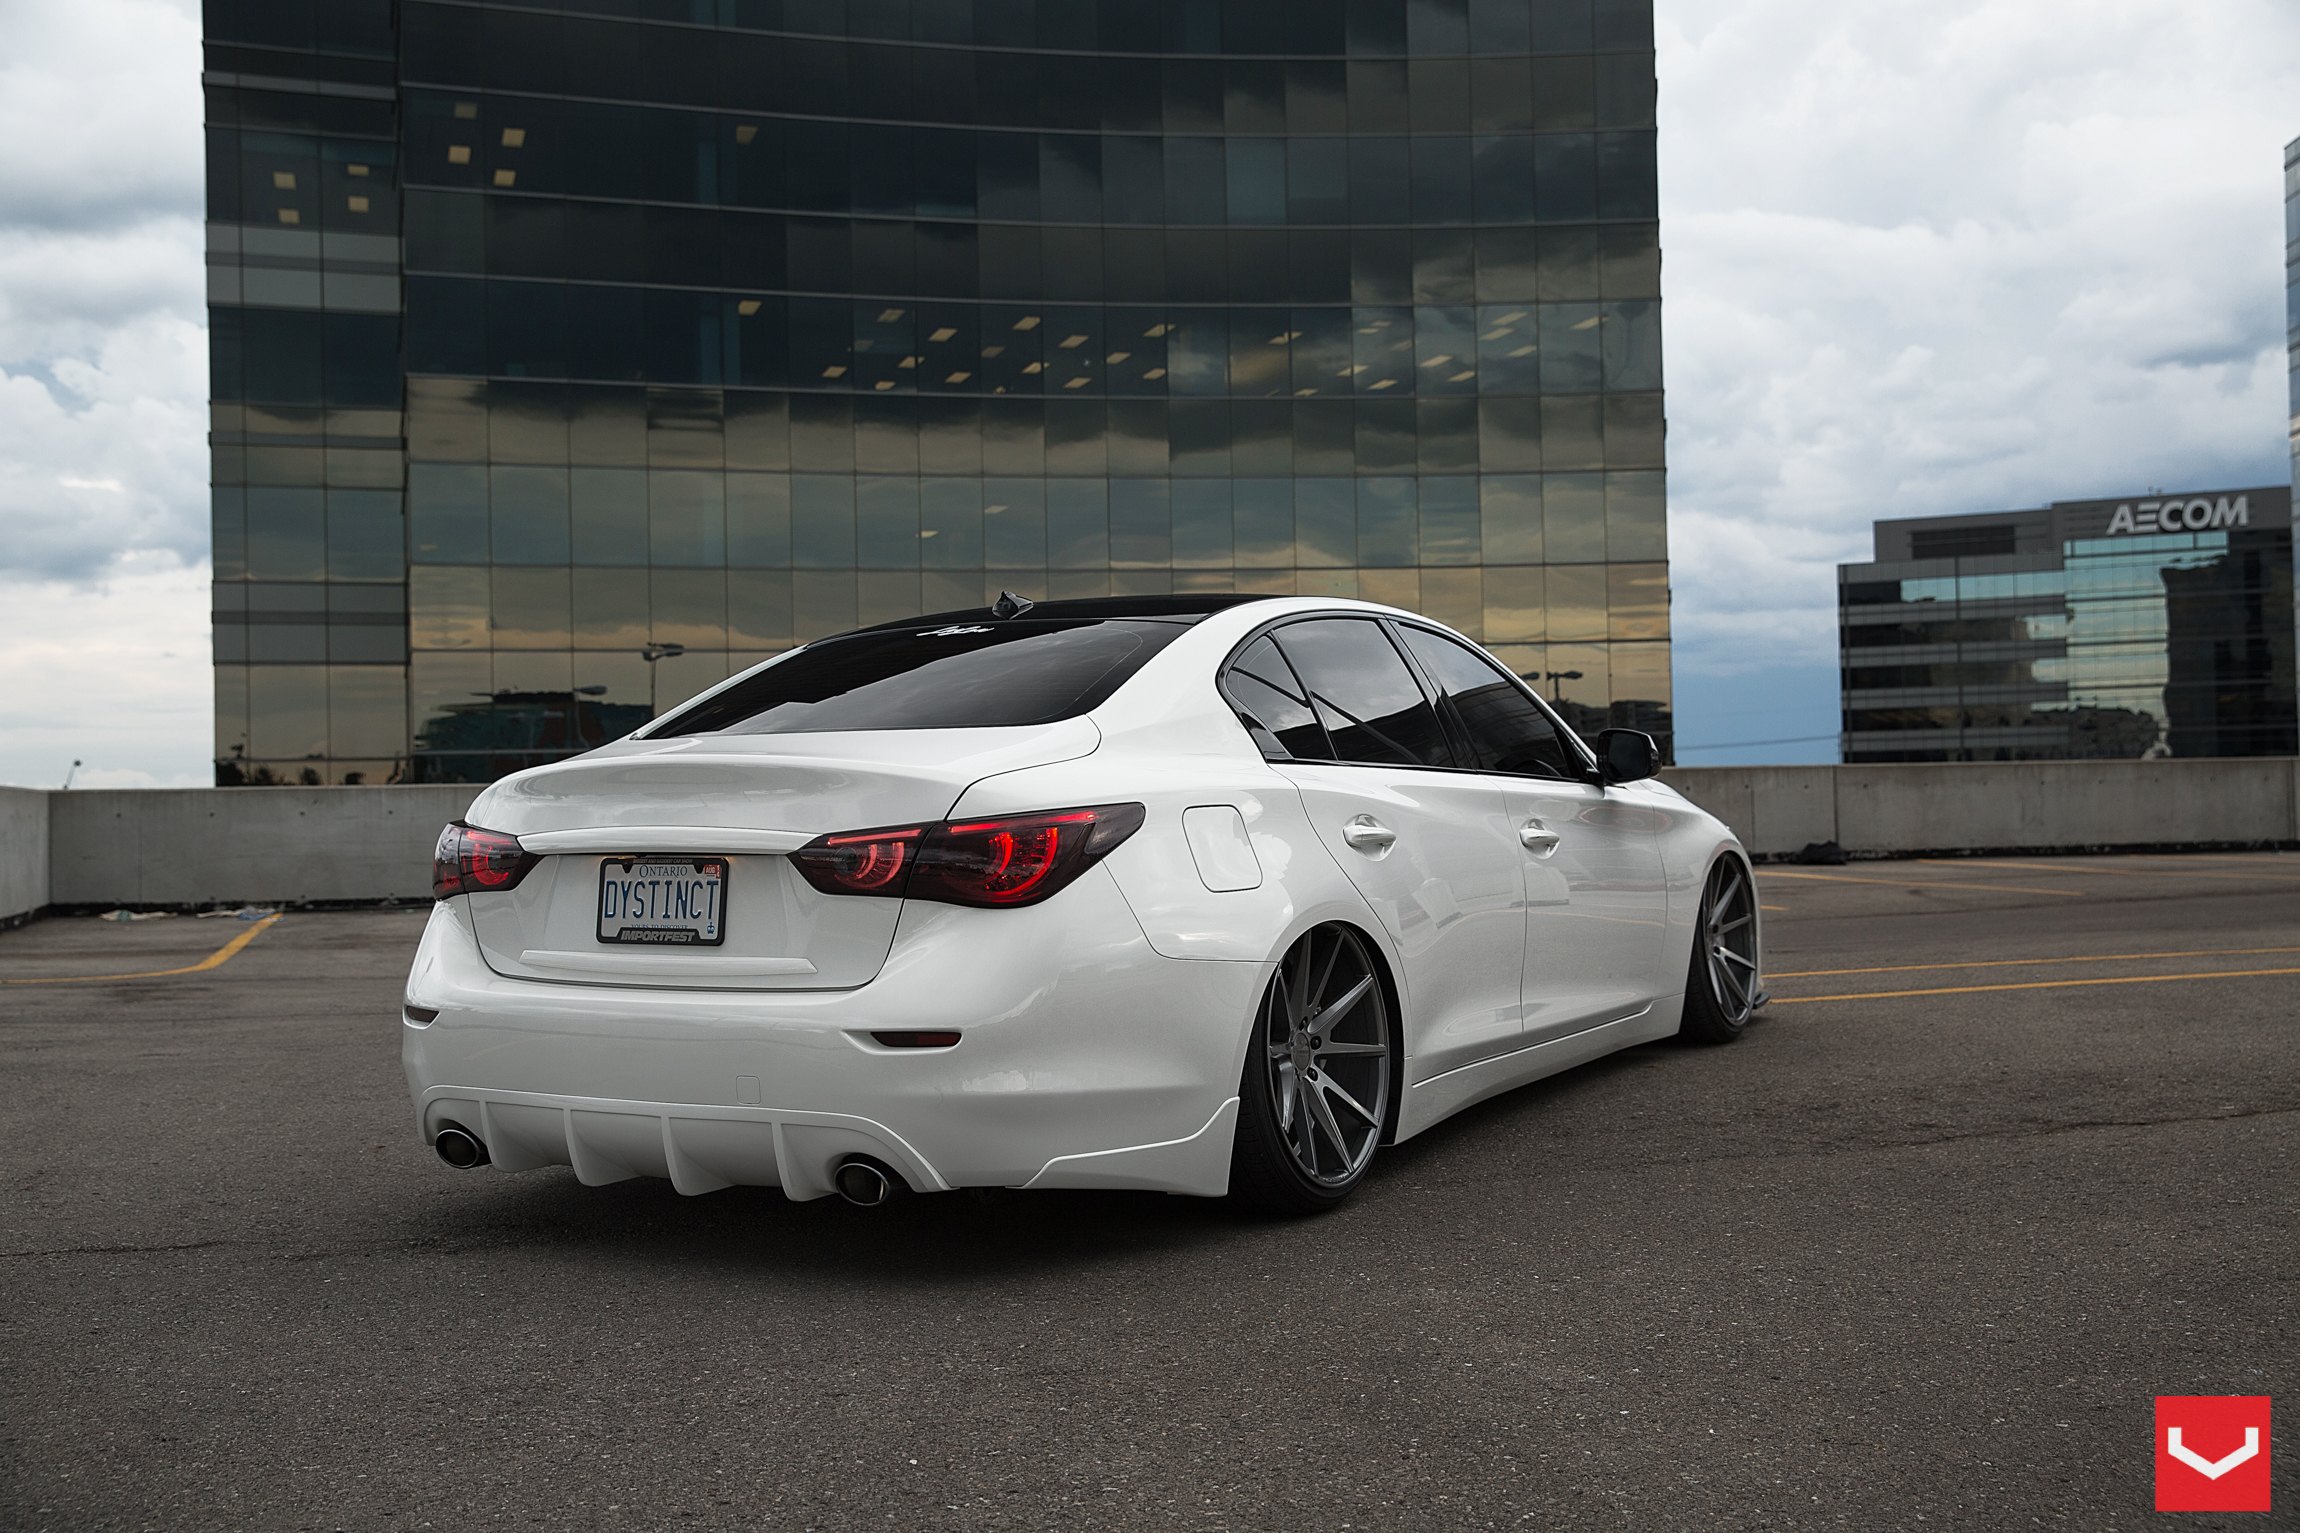 Aftermarket Rear Diffuser on White Infiniti Q50 - Photo by Vossen